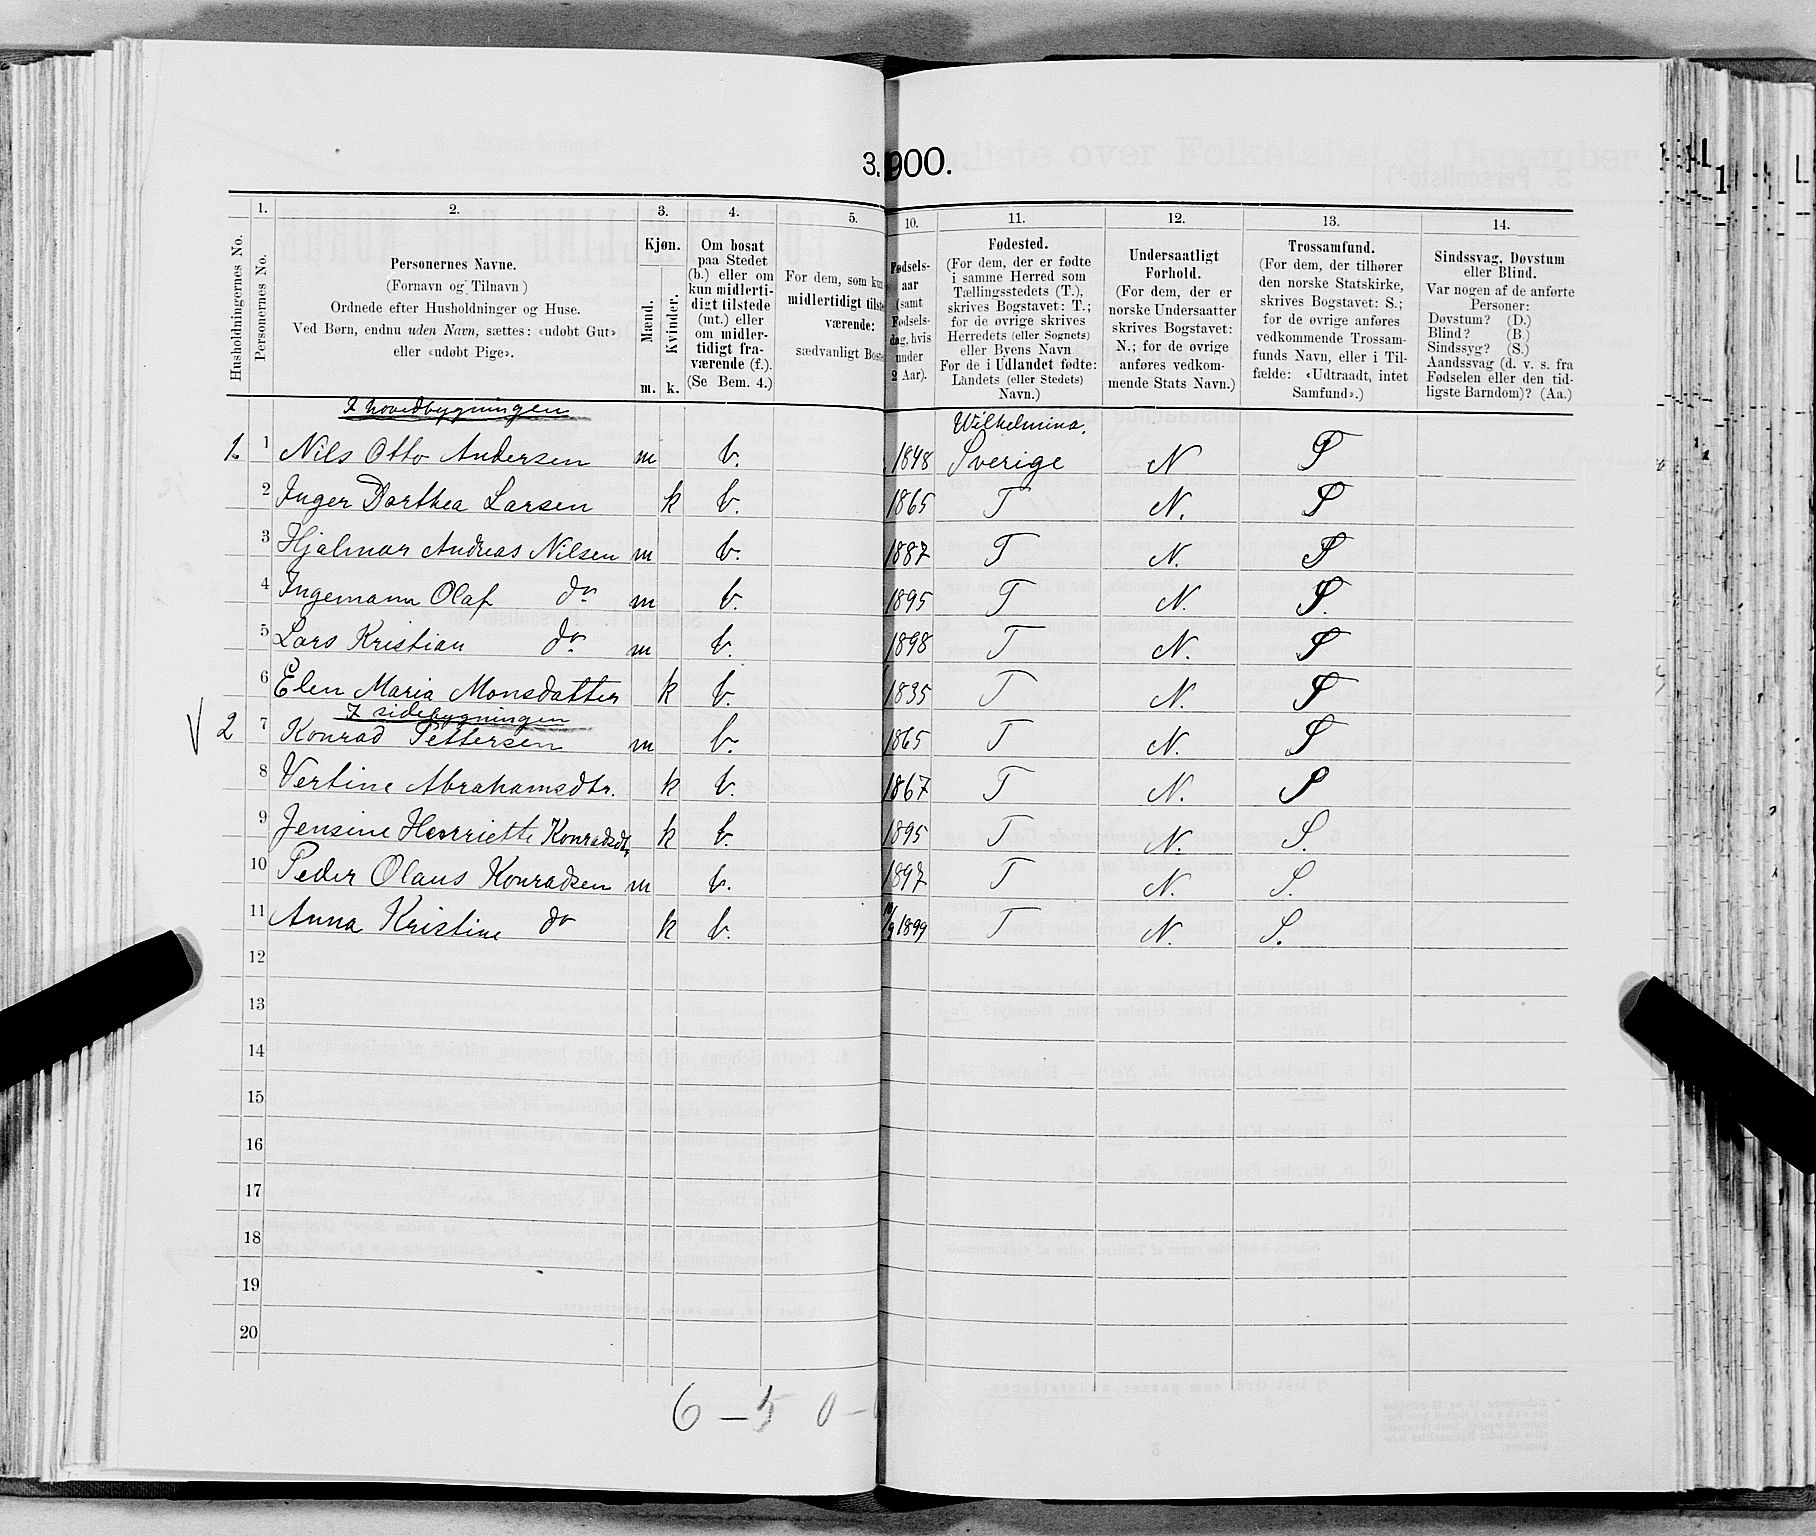 SAT, 1900 census for Mo, 1900, p. 174